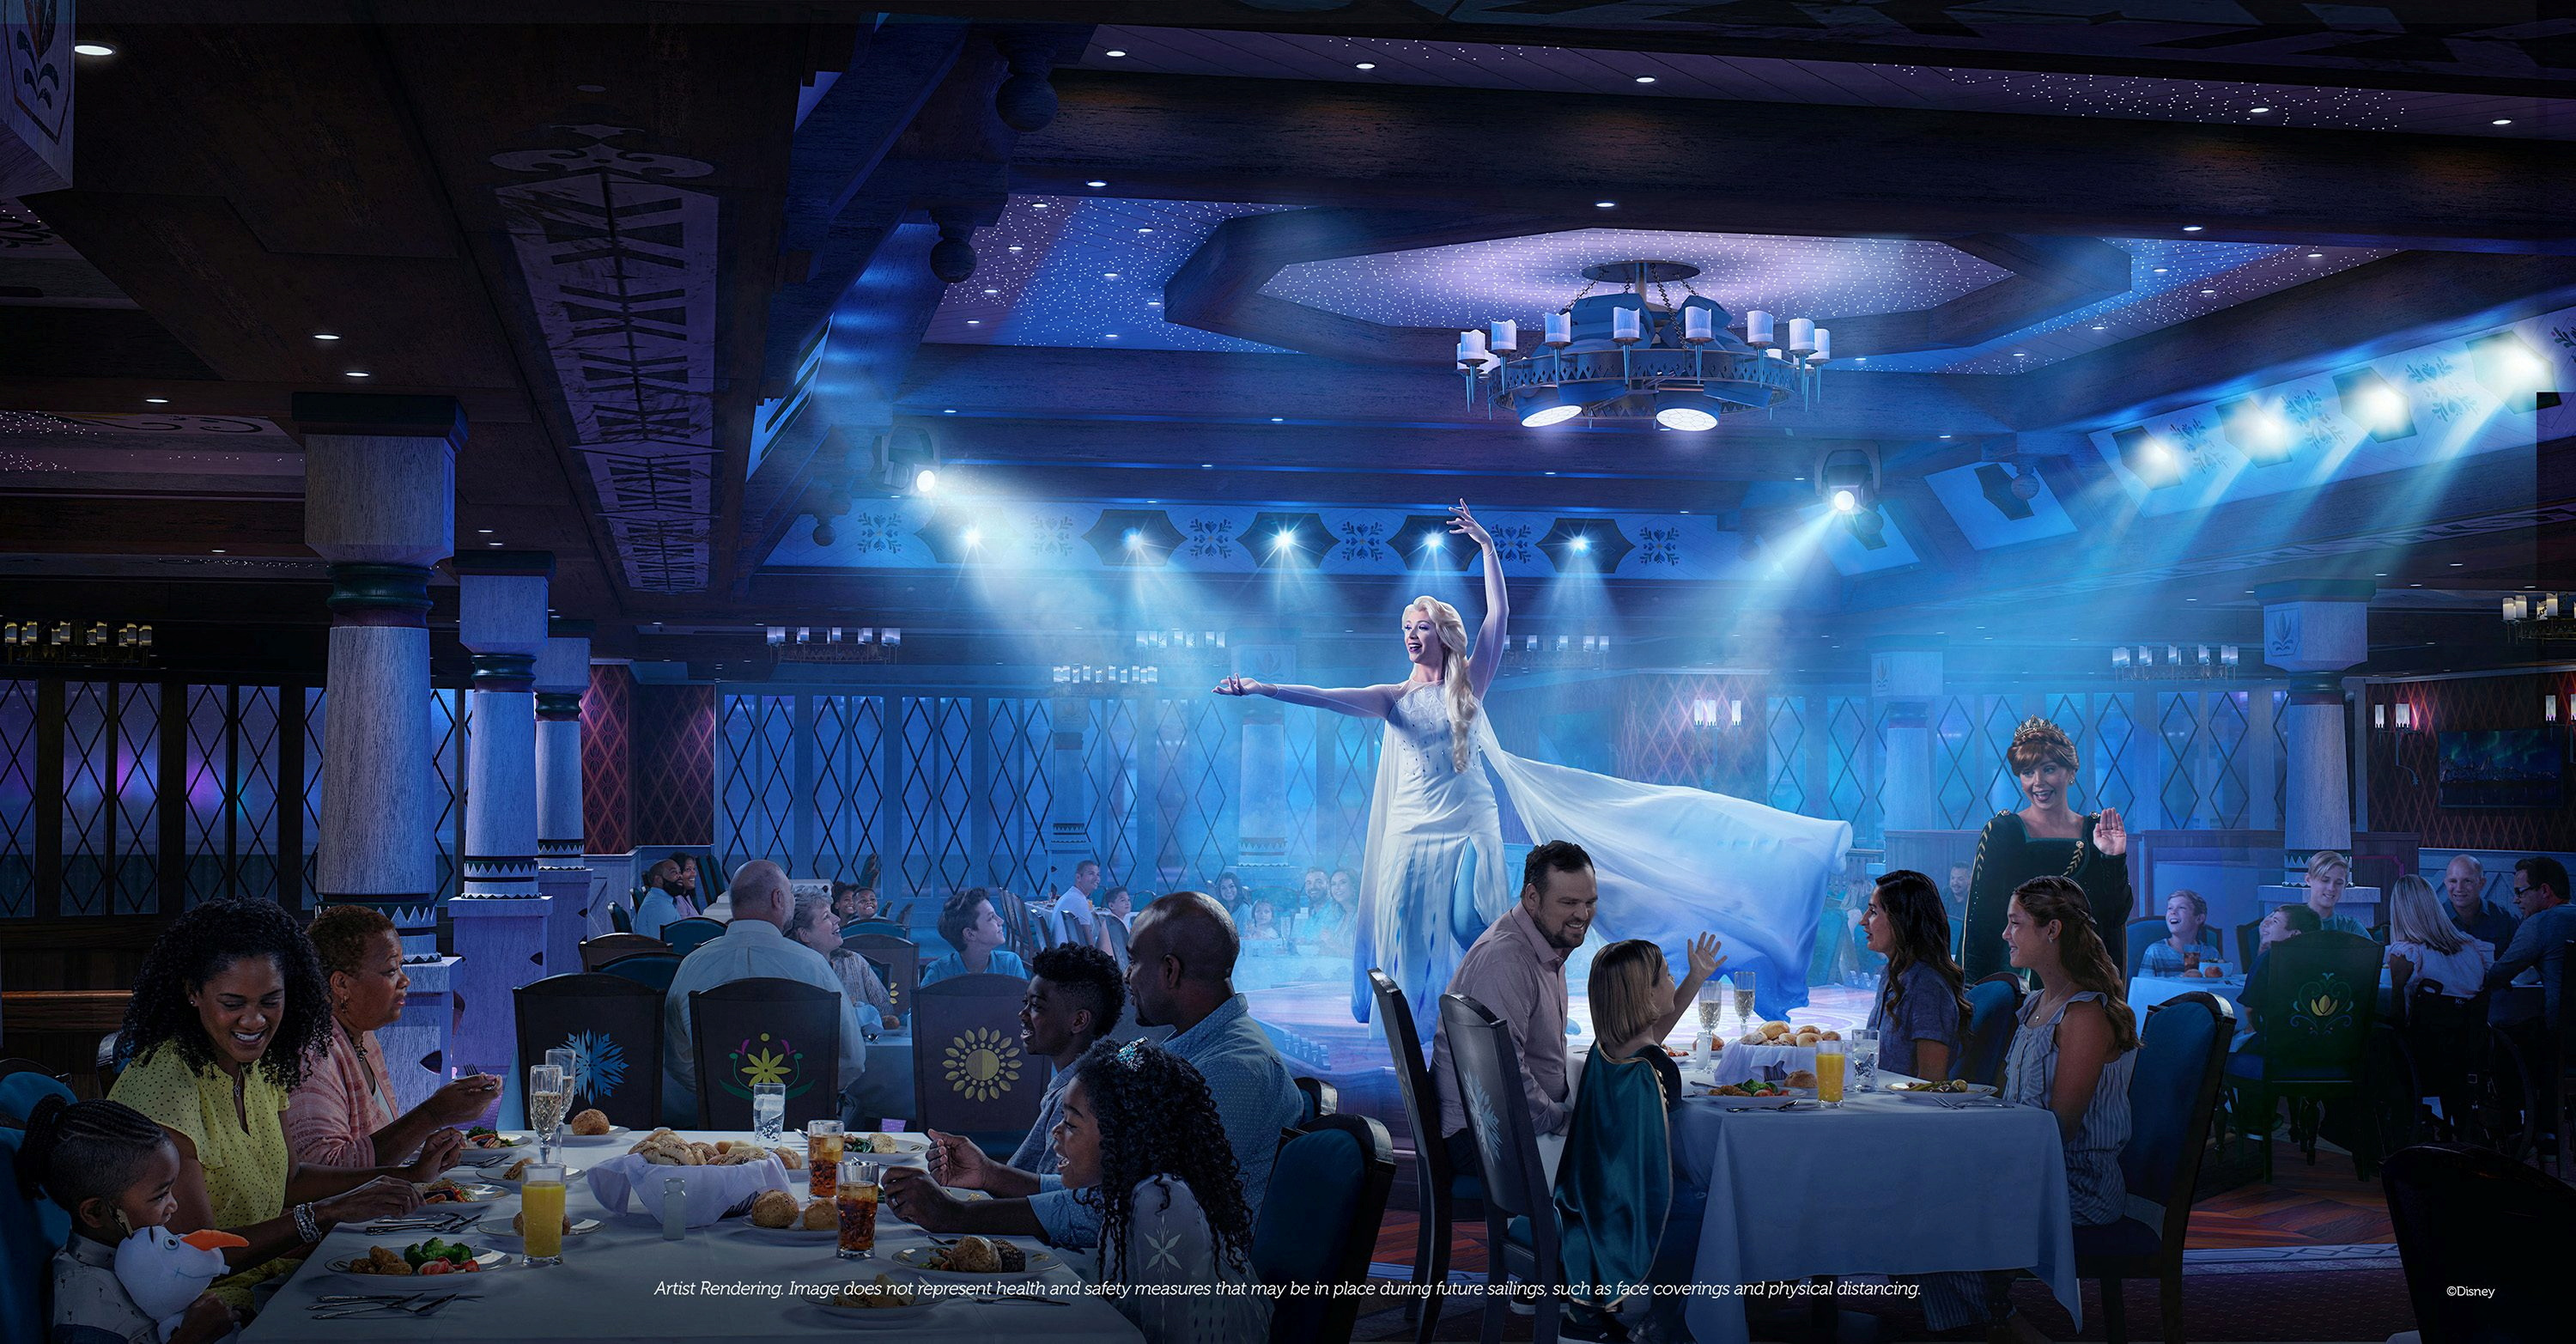 Walt Disney Co christens 'The Wish,' its first new cruise ship in a decade